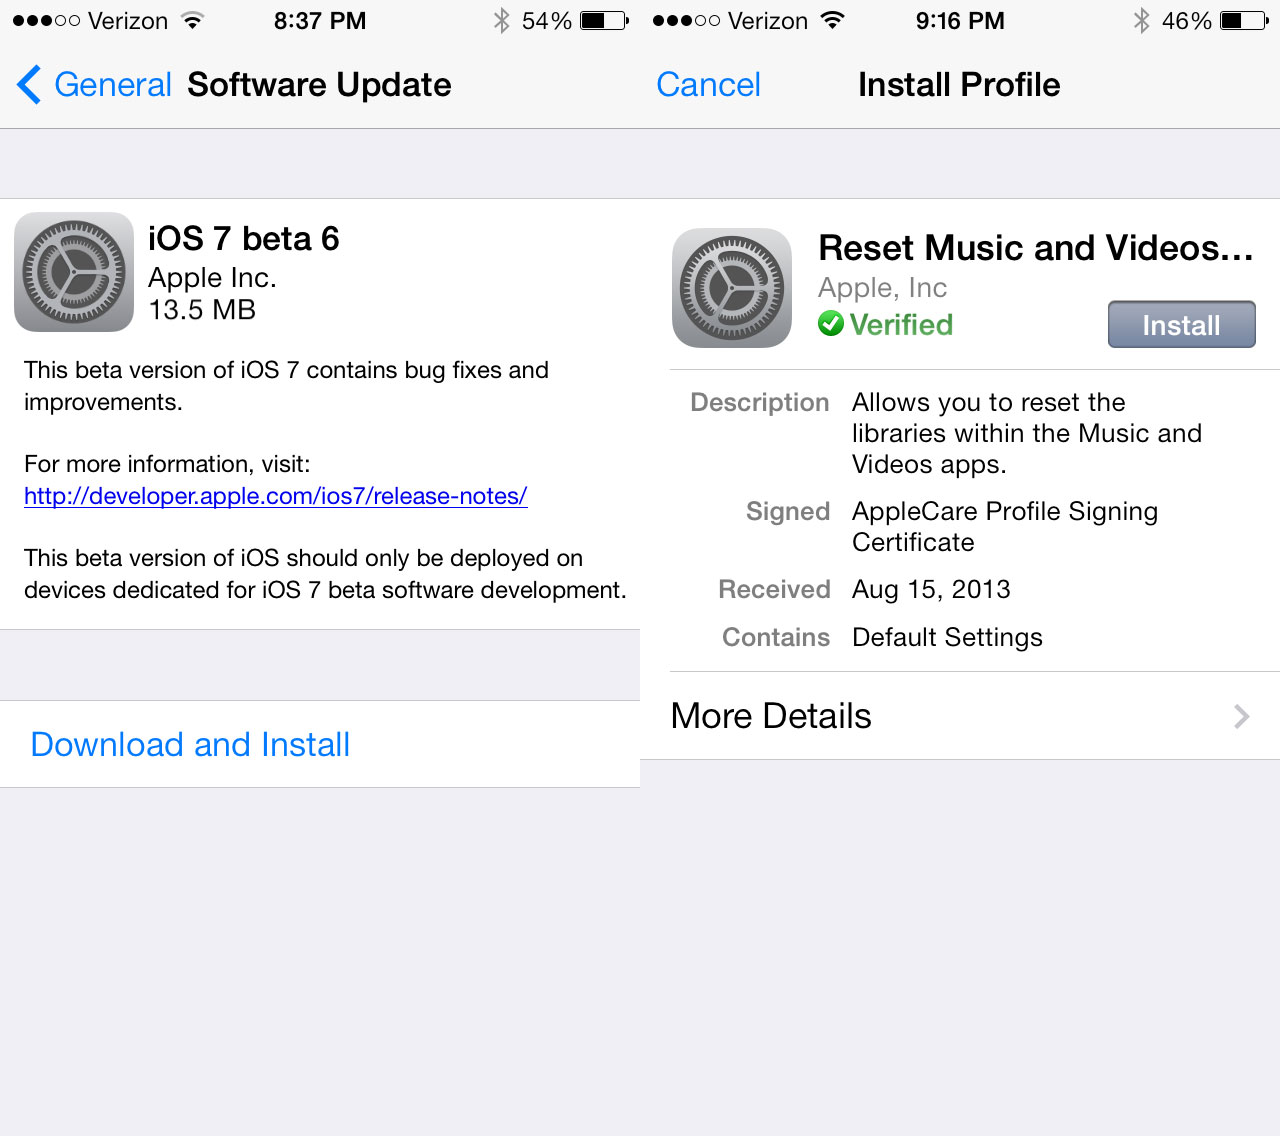 The iOS 7 beta 6 release arrives late Thursday night with small fixes.